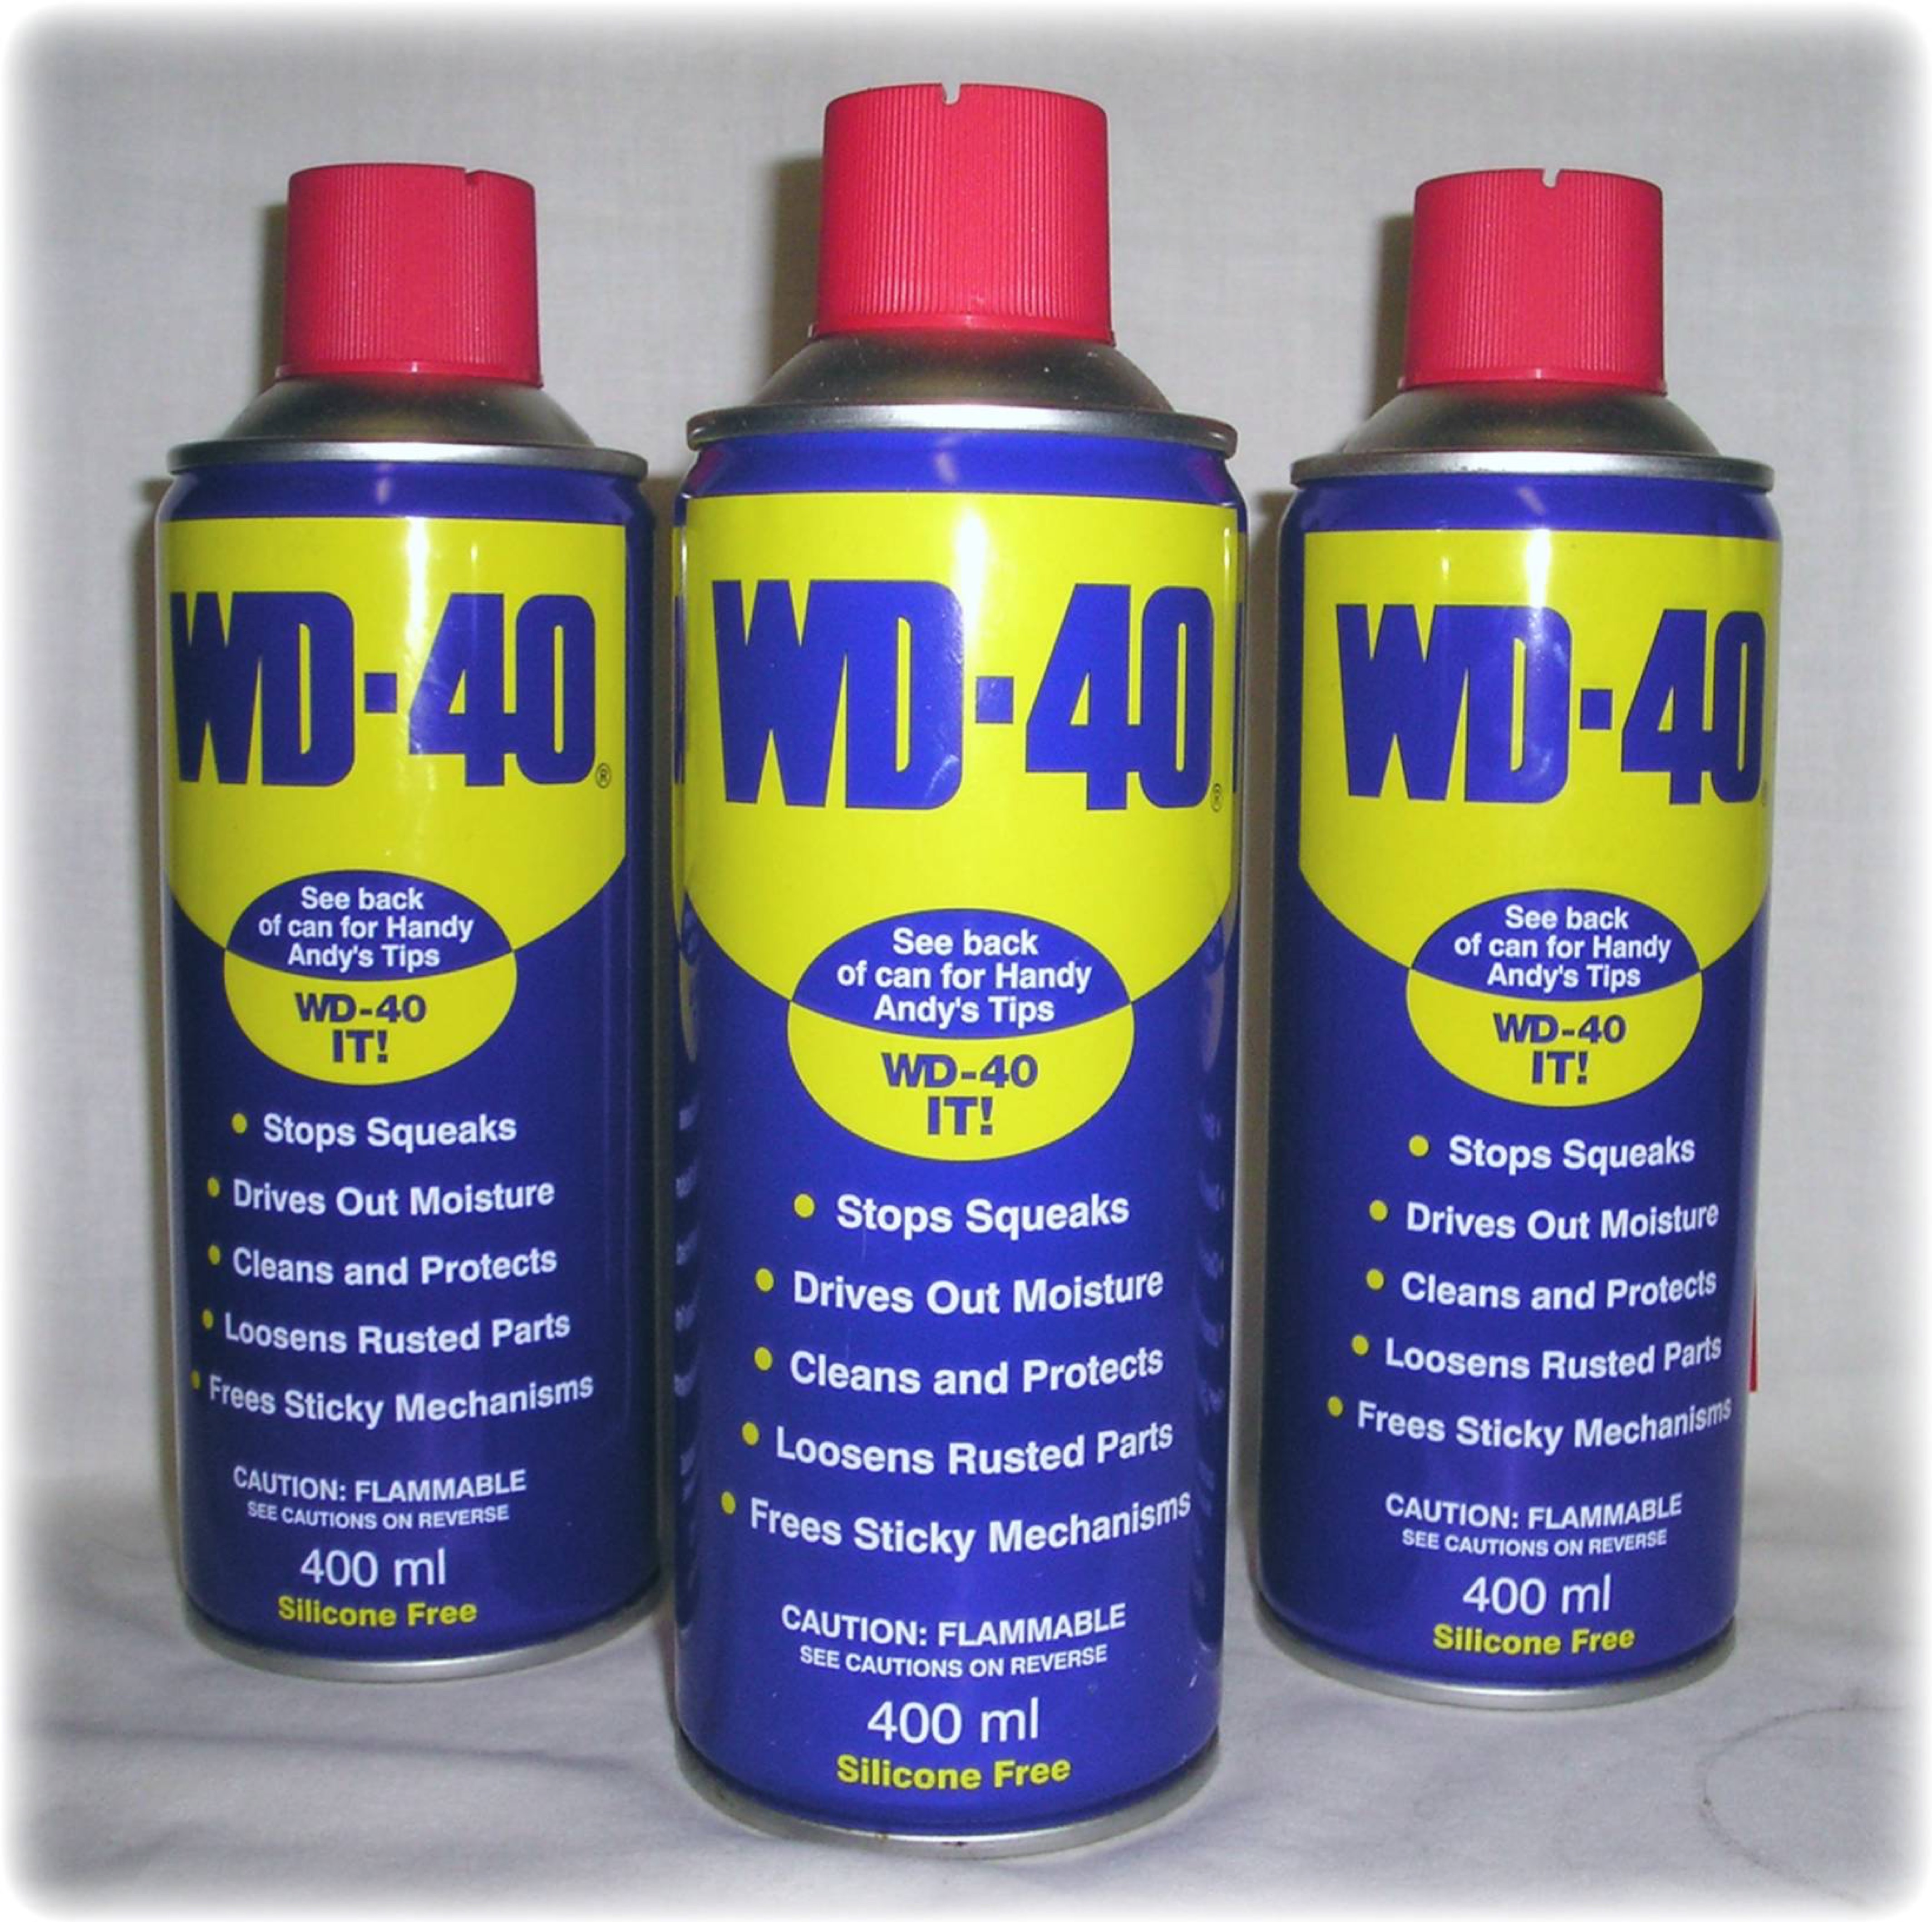 WD-40 SPRAY SILICONE FREE 400 ML LOT OF 3